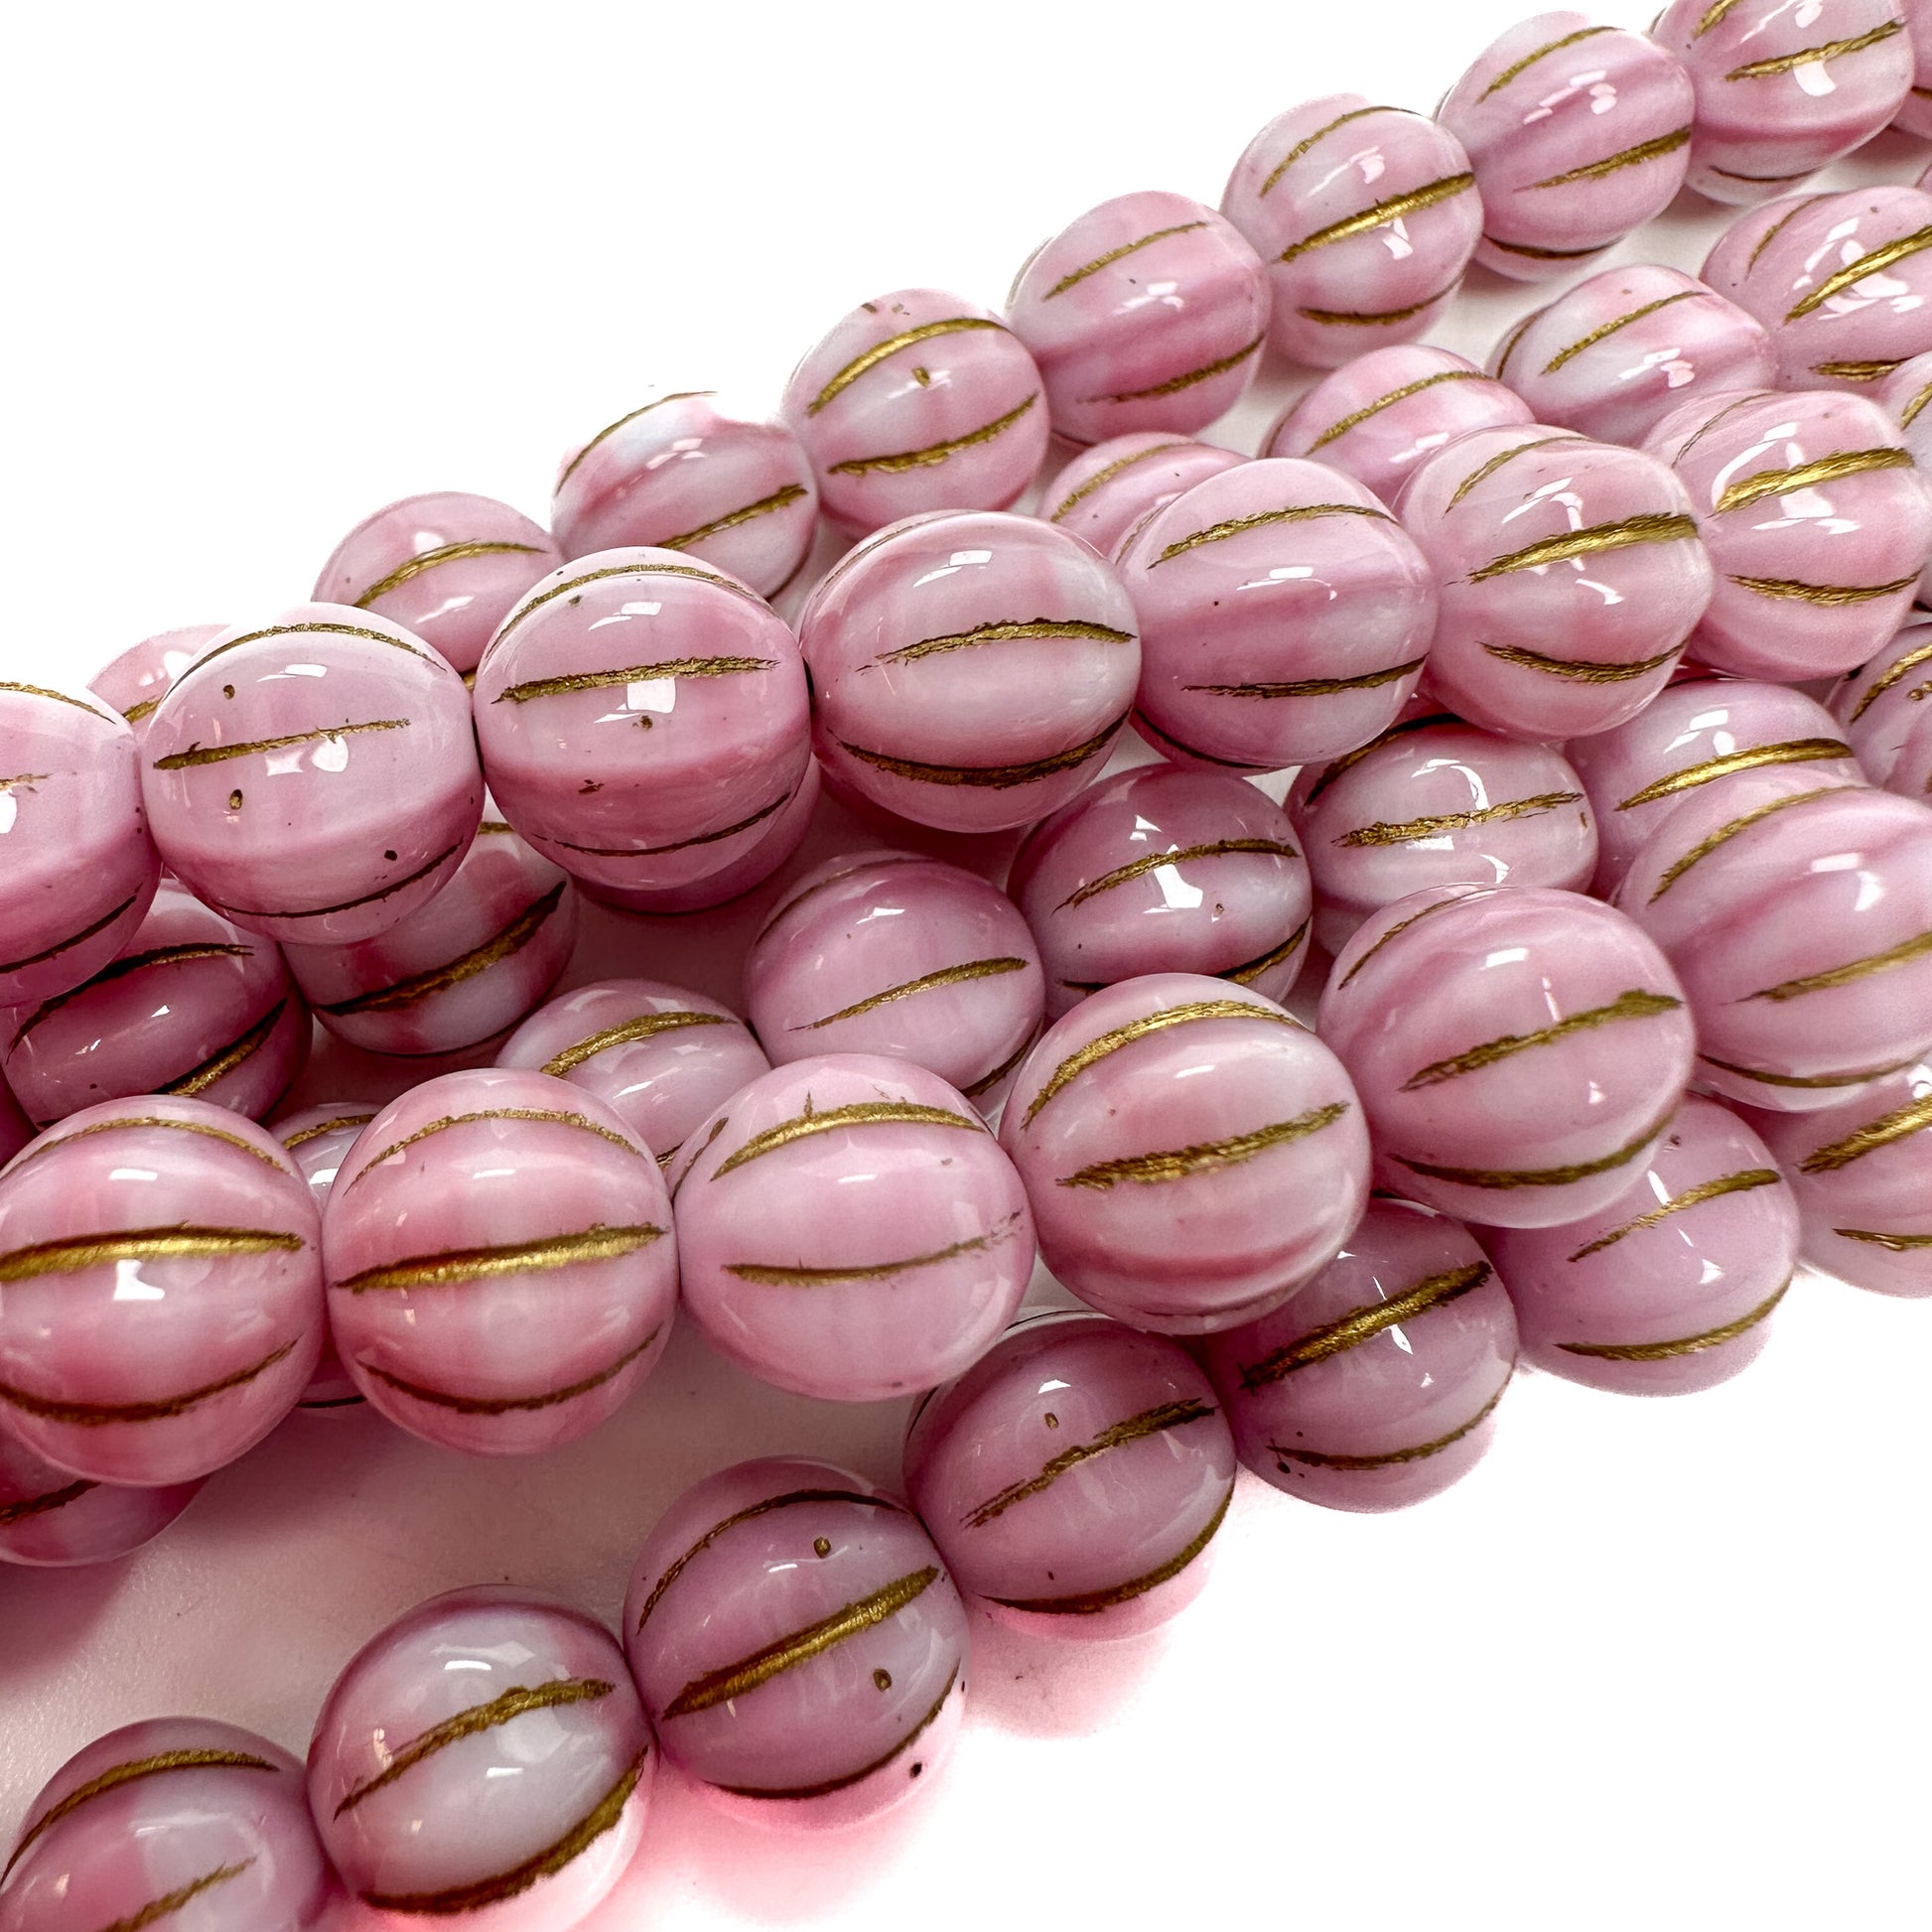 Pink and White with Gold Wash 8mm Melon Glass Bead - 16 pcs.-The Bead Gallery Honolulu